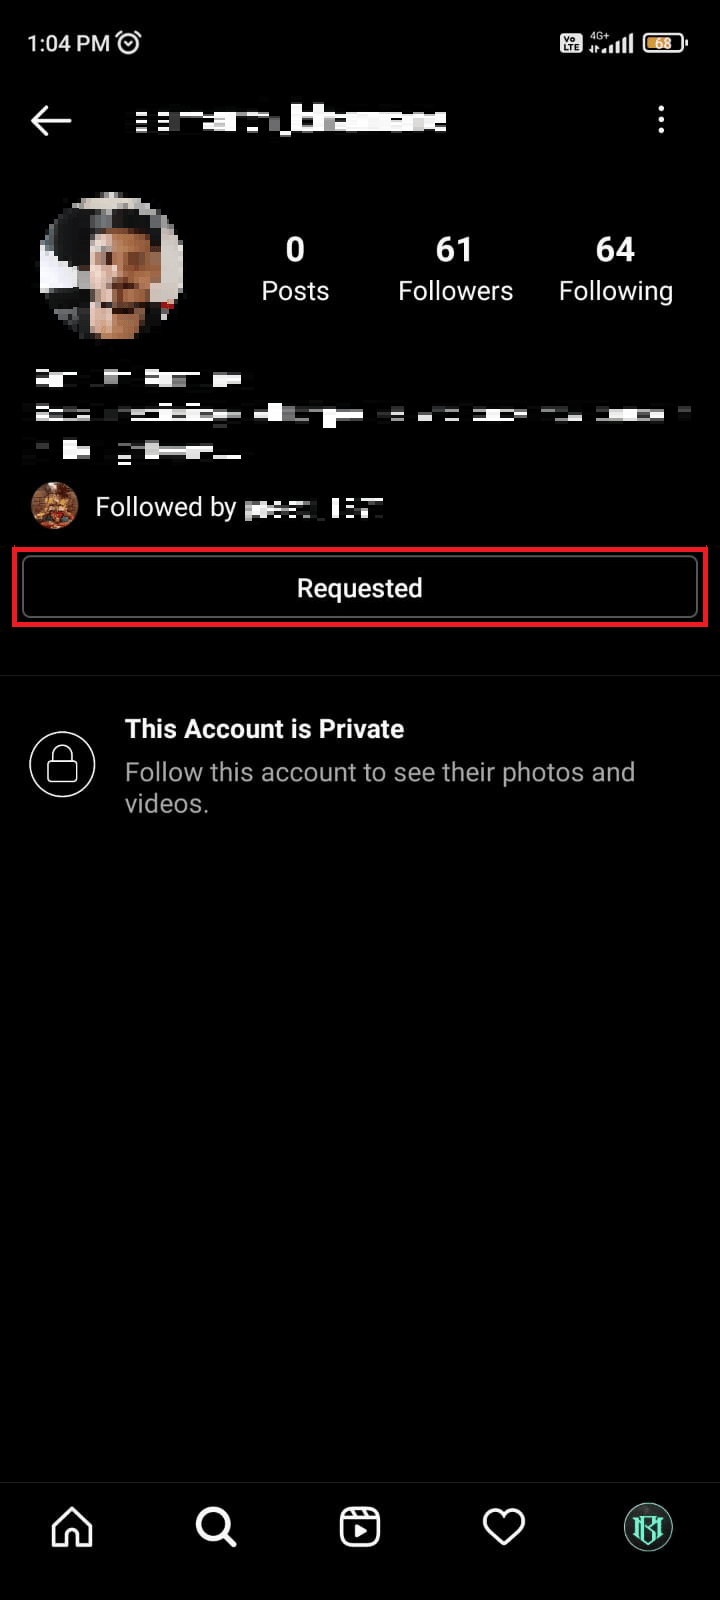 The following request will be sent and you will see the Requested message on the private profile